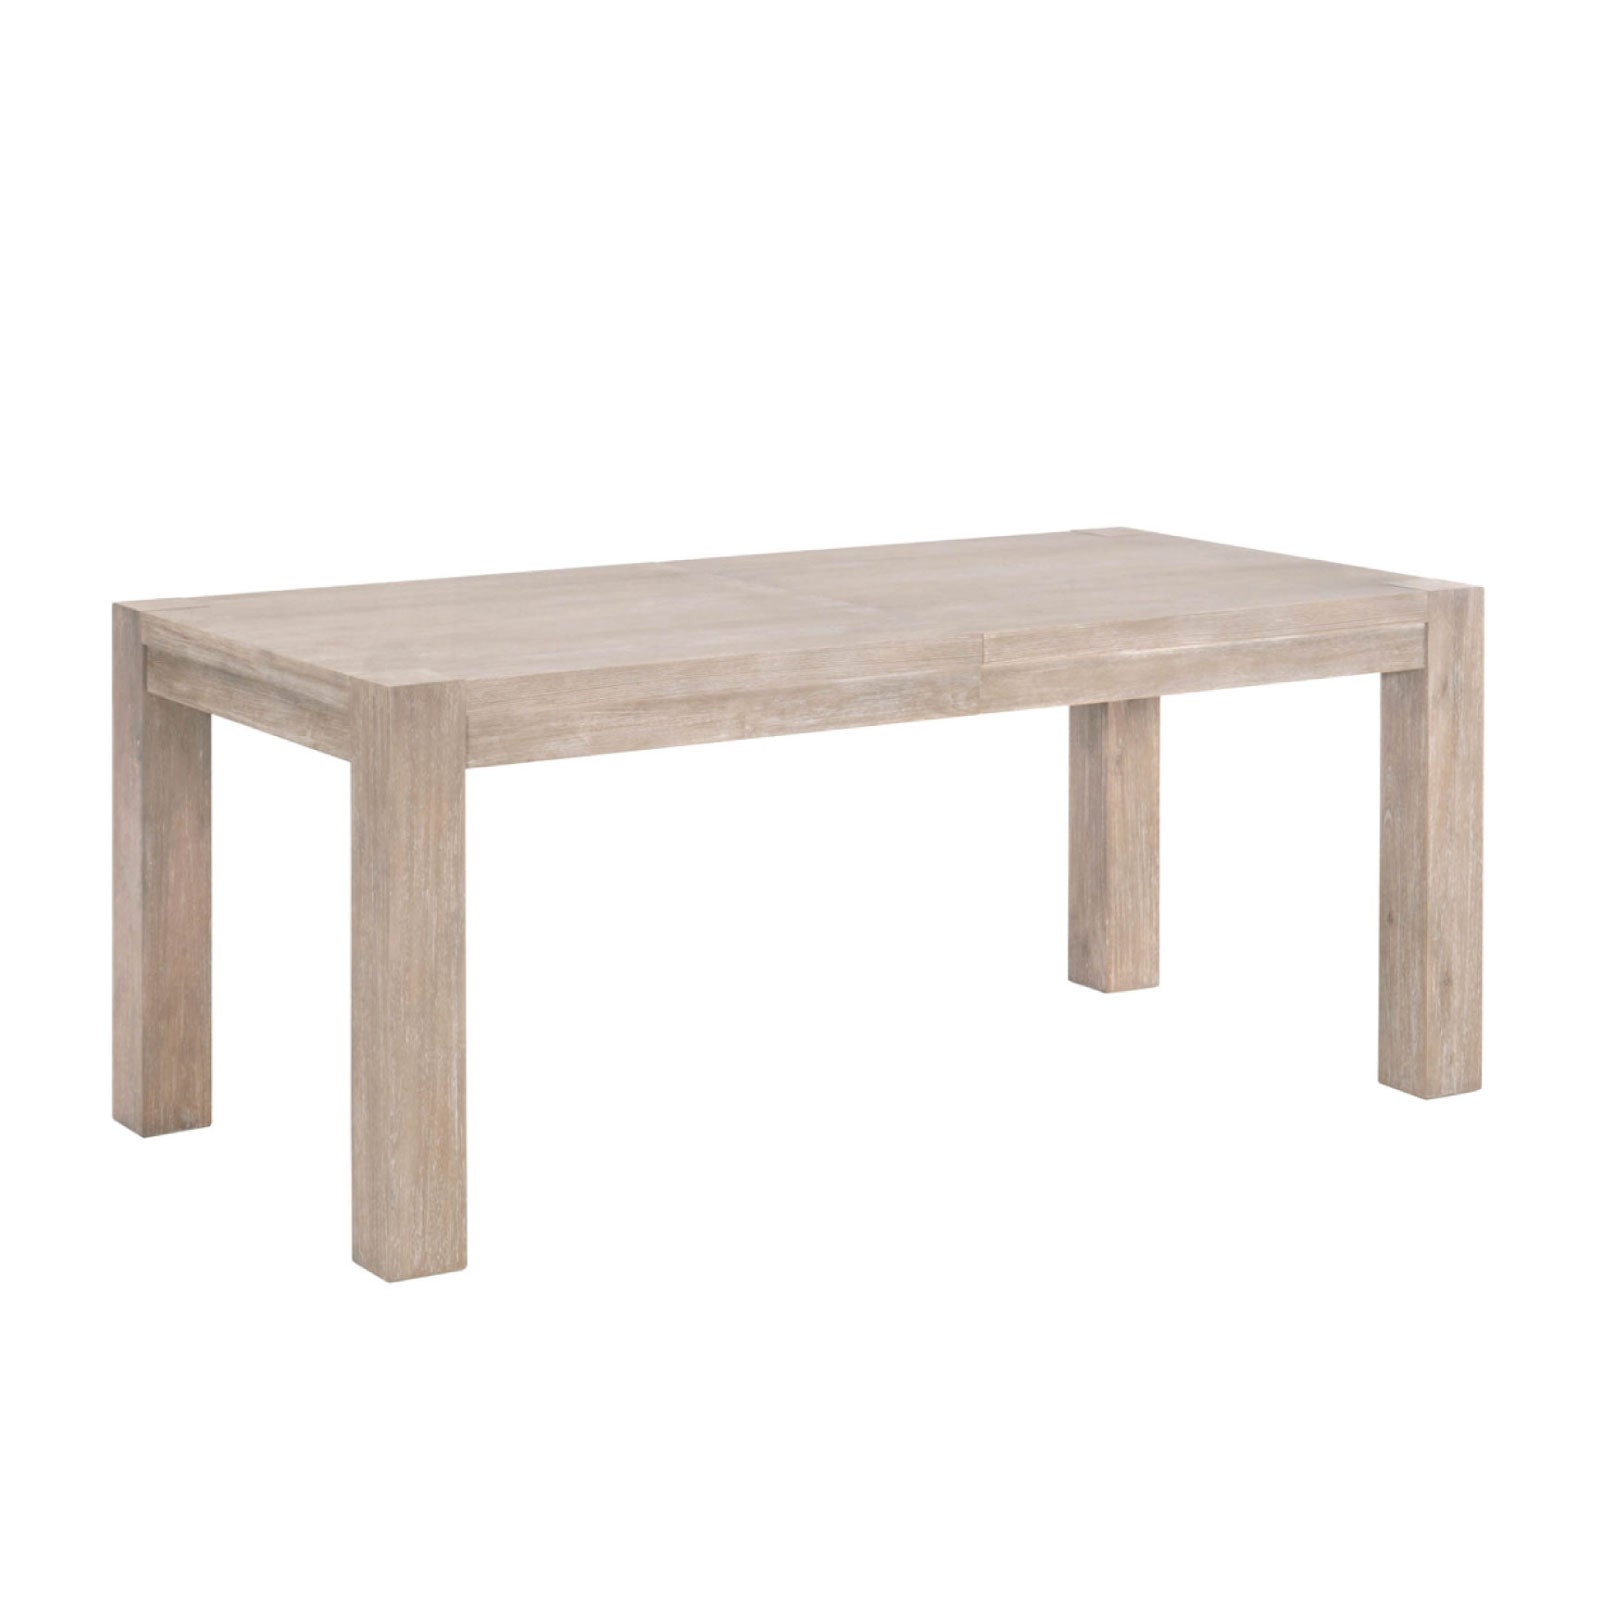 Arlow Extension Dining Table